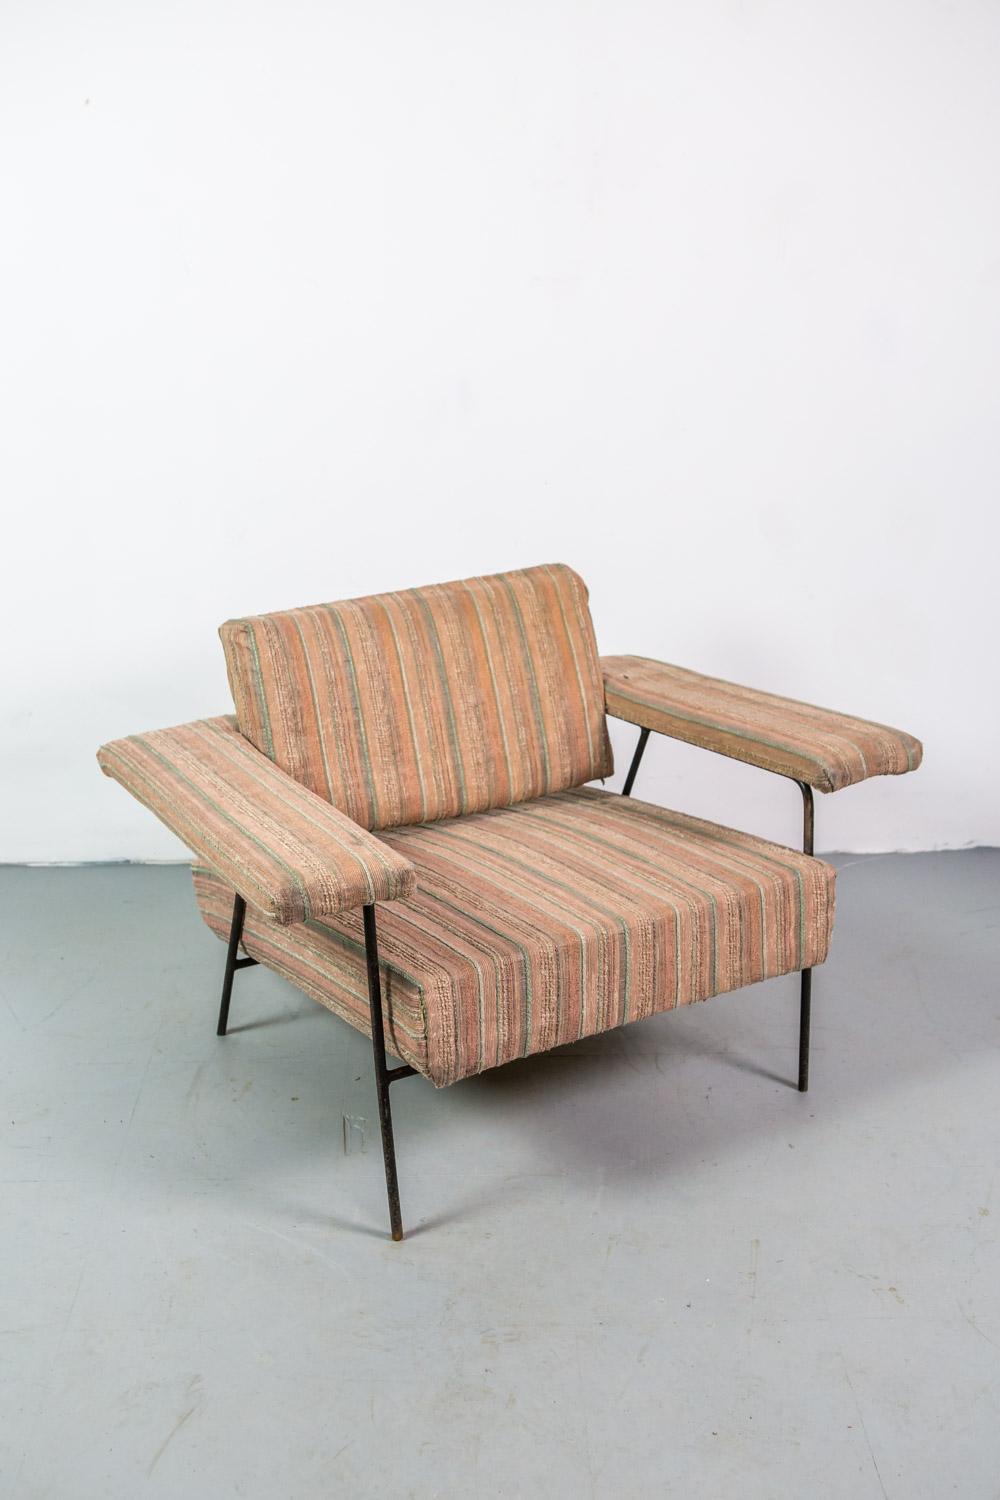 Rare Adrian Pearsall lounge chair for Craft Associates. The chair has a wrought iron frame with upholstery.